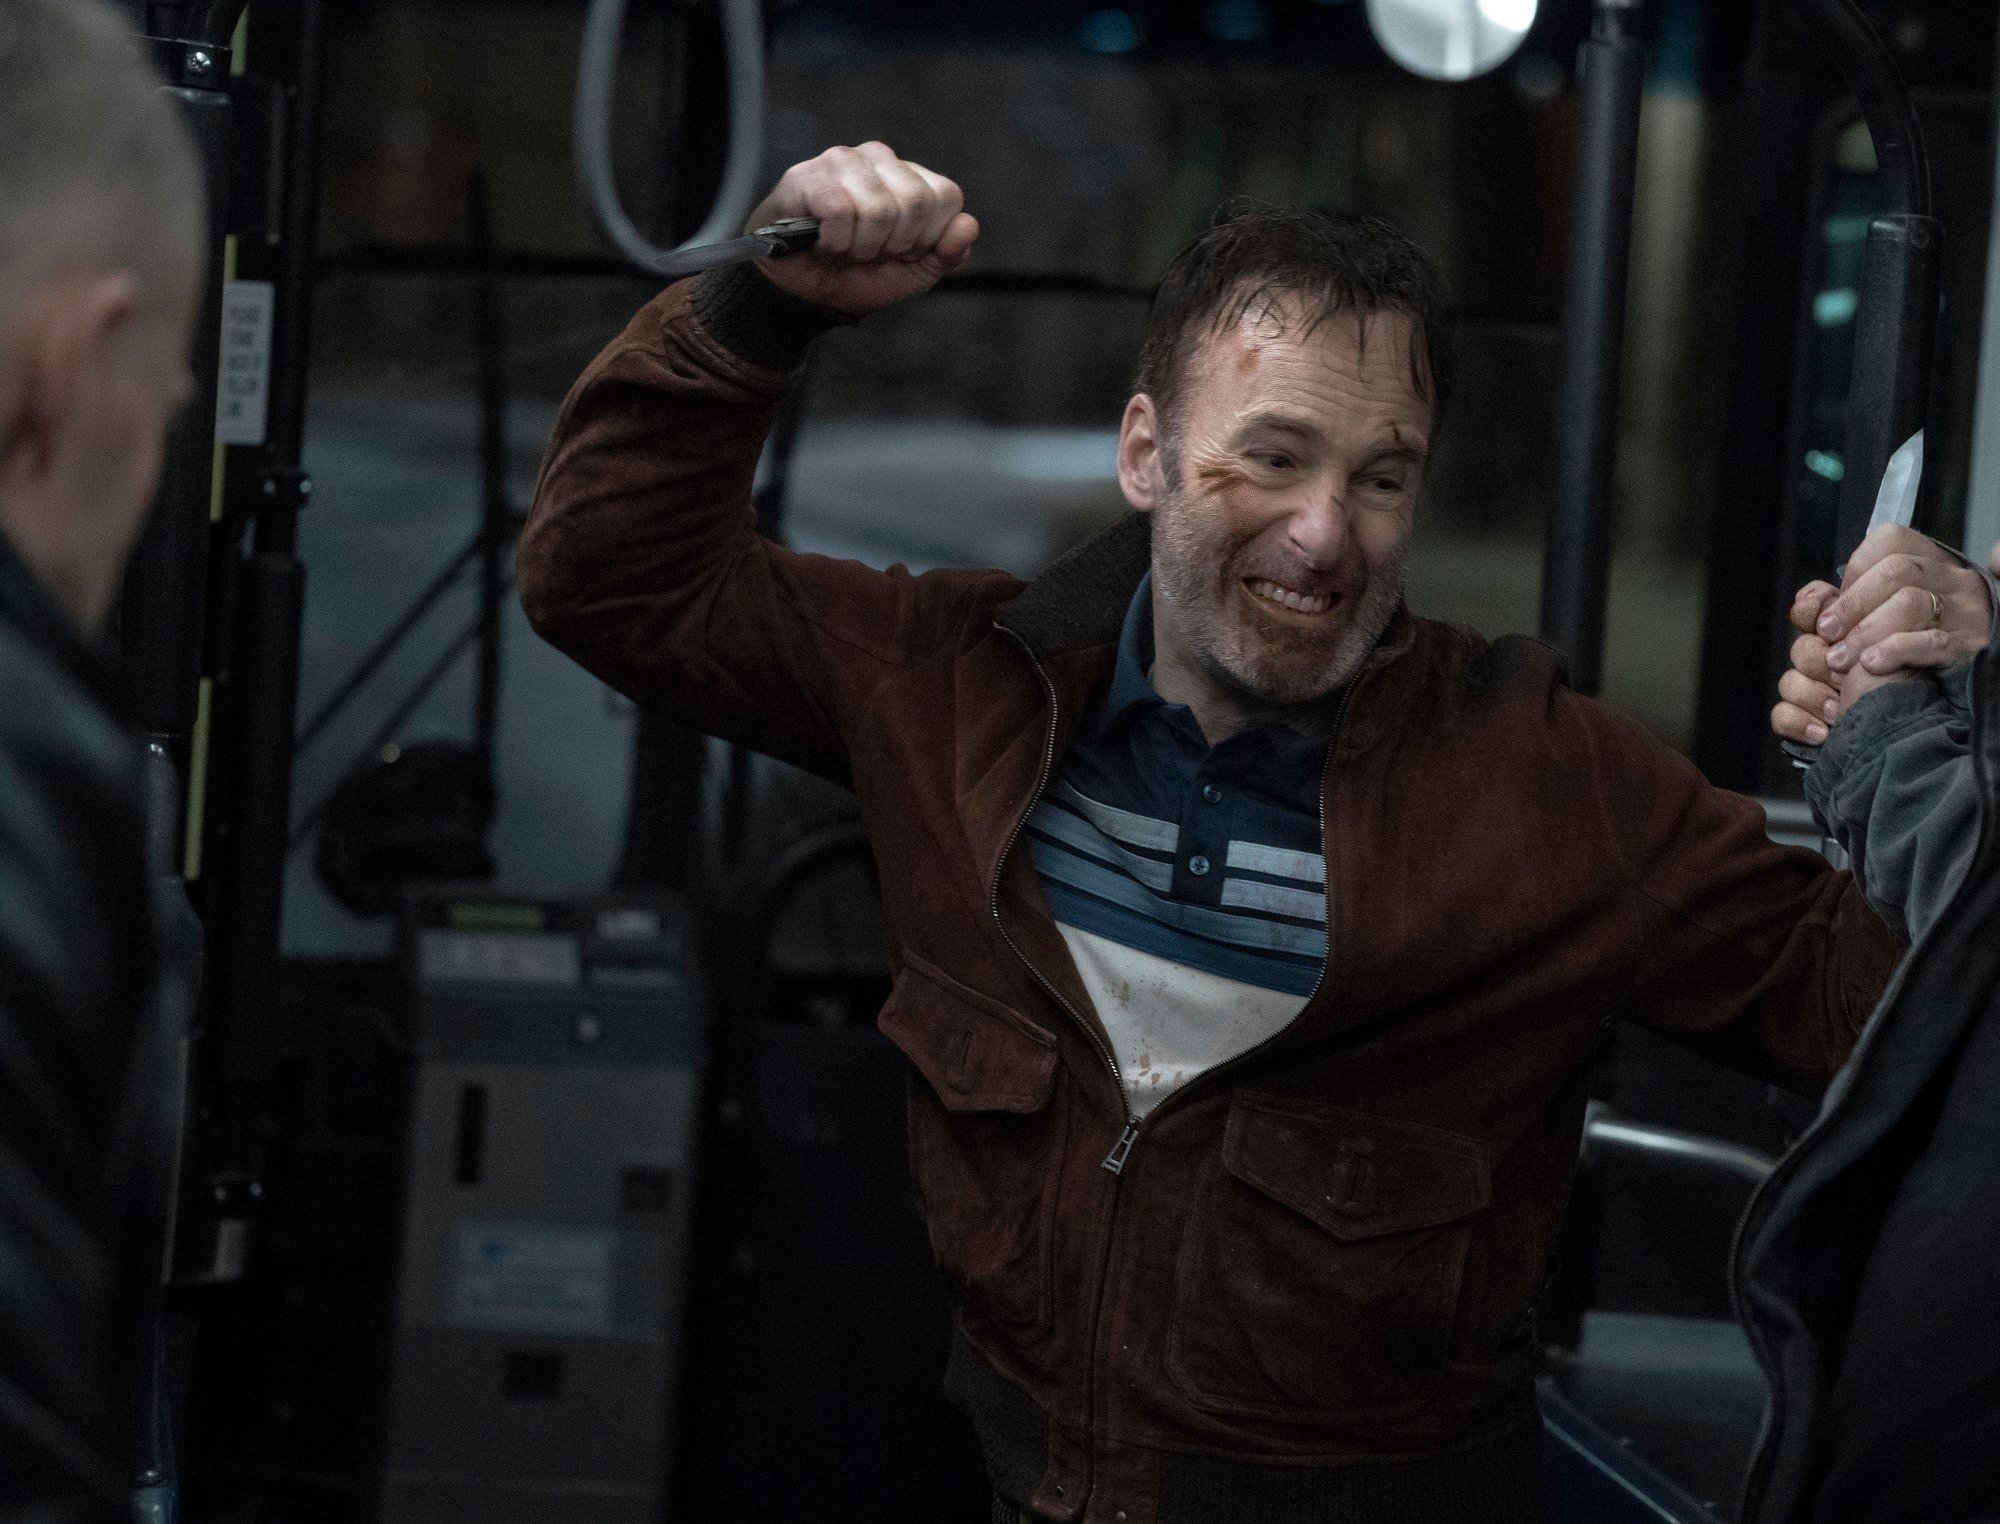 Bob Odenkirk punches Russian gangsters on the bus